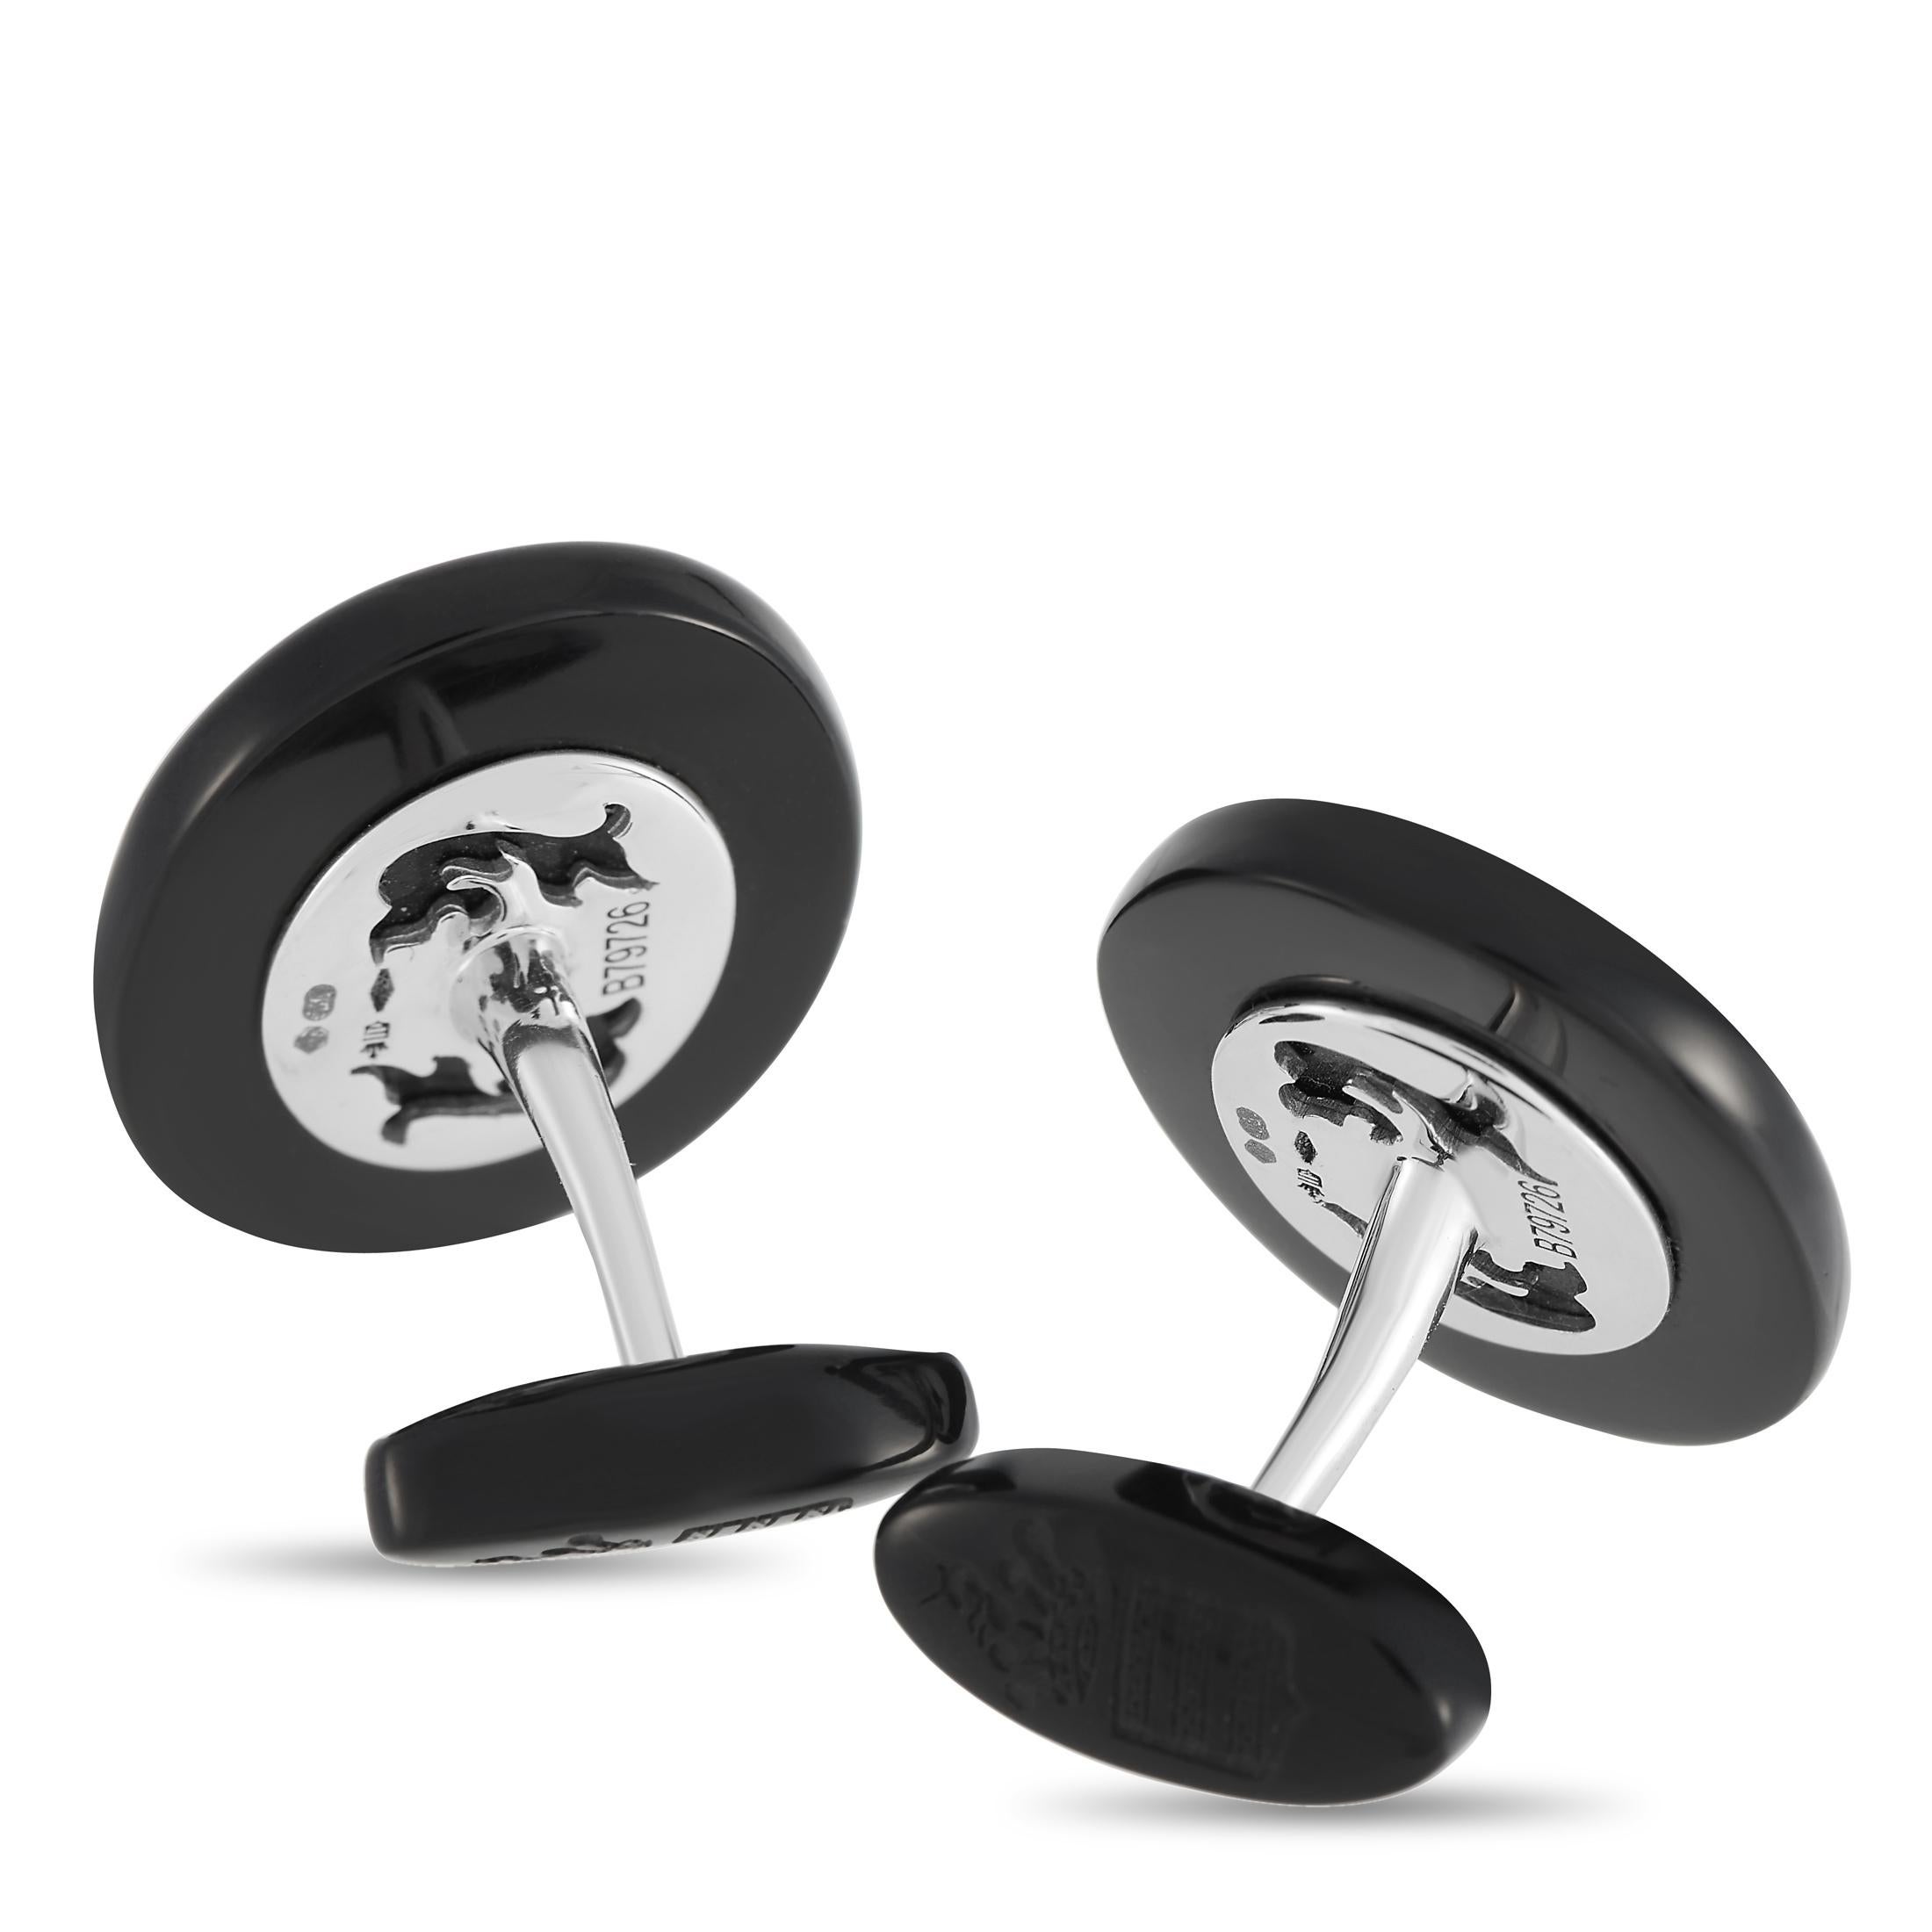 Keep your look sleek and simple with these De Grisogono cufflinks. A glossy black ceramic base provides the perfect backdrop for silver-toned accents at the center, which are also accented by the brand’s moniker engraved near the bottom. Each one